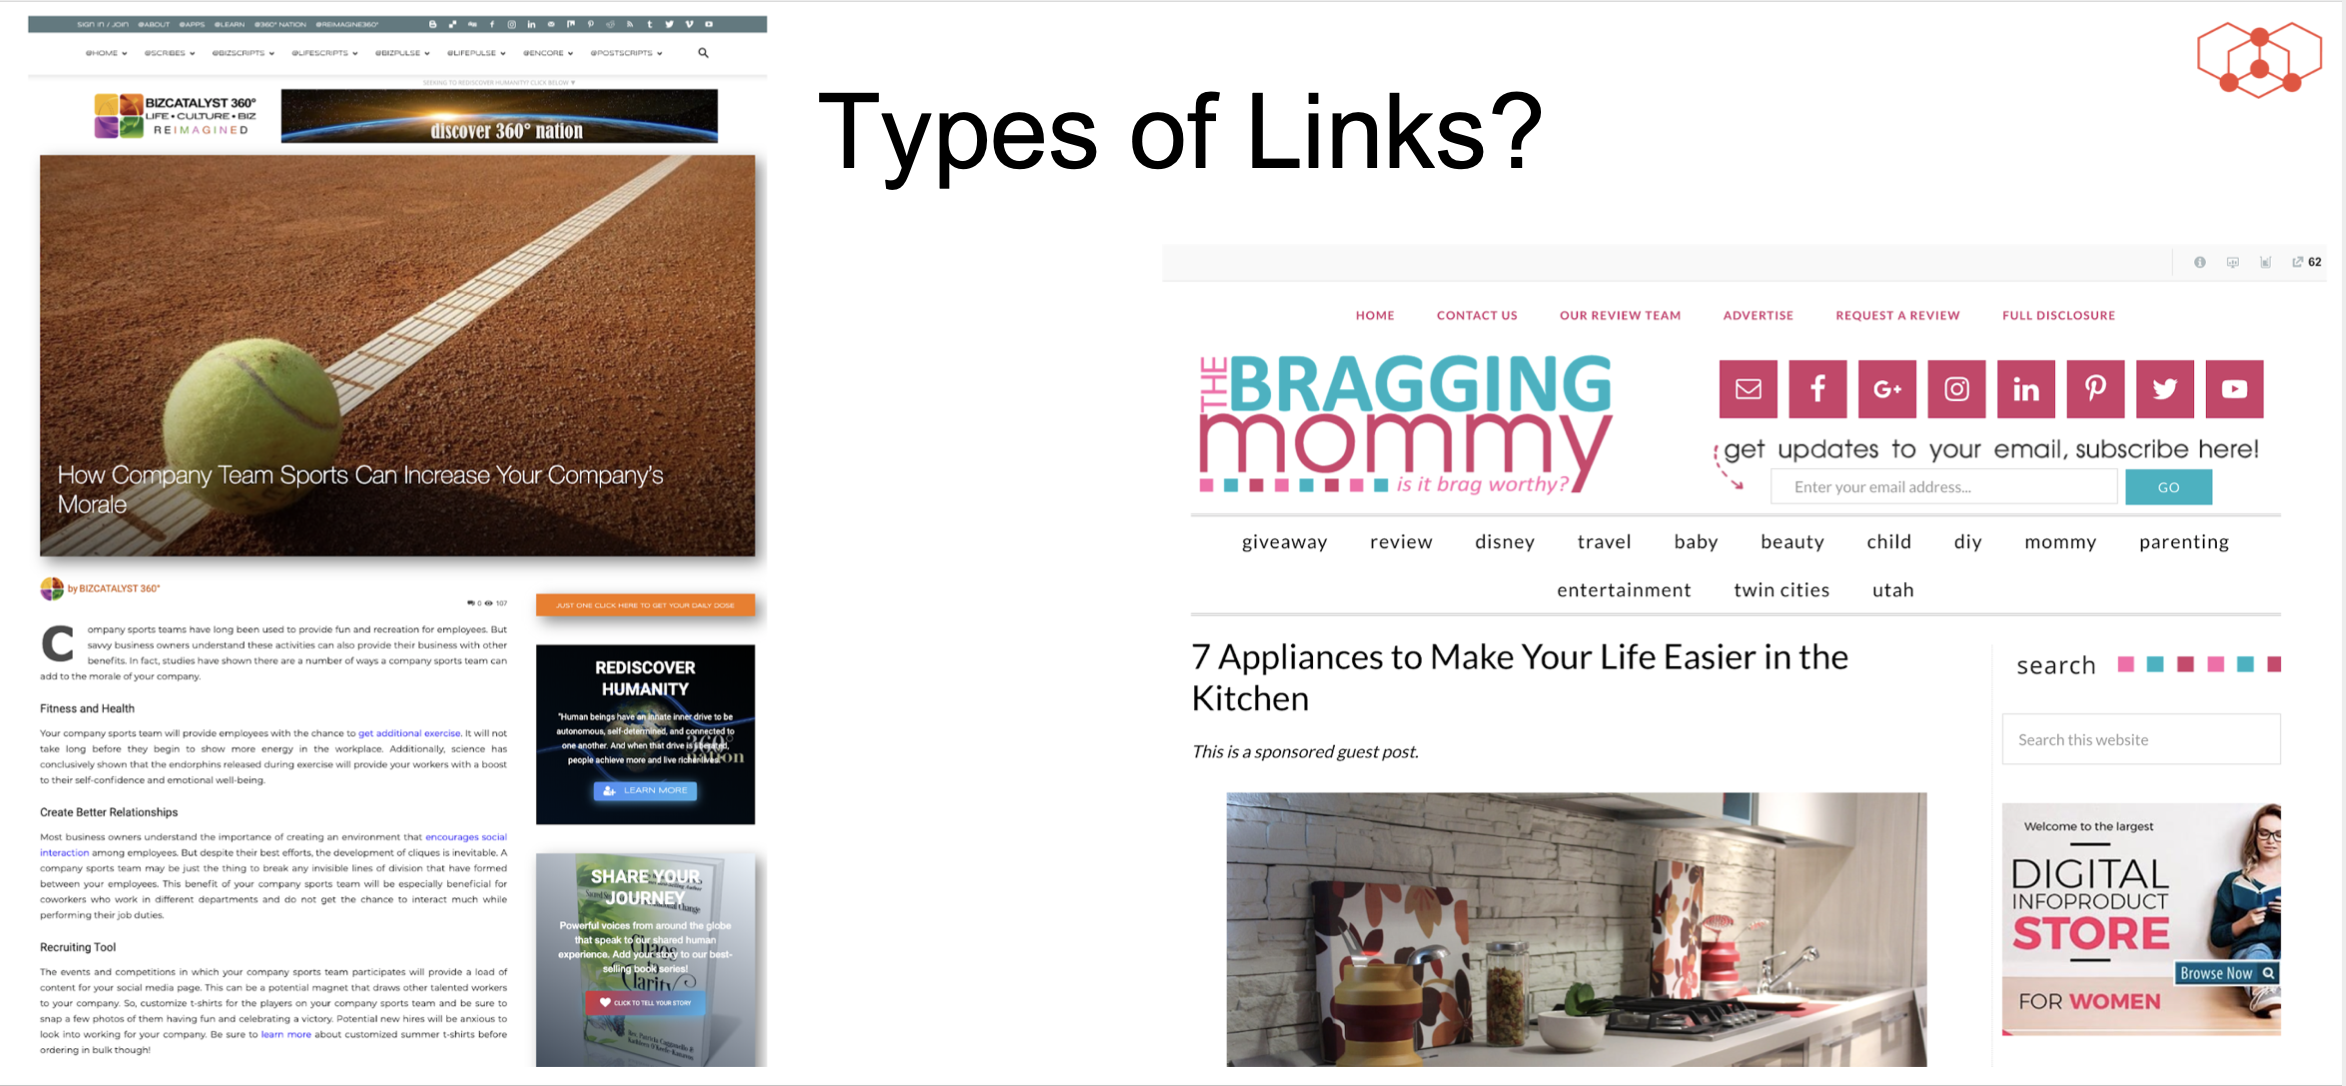 How we generated over 600 links in 30 days and you can too